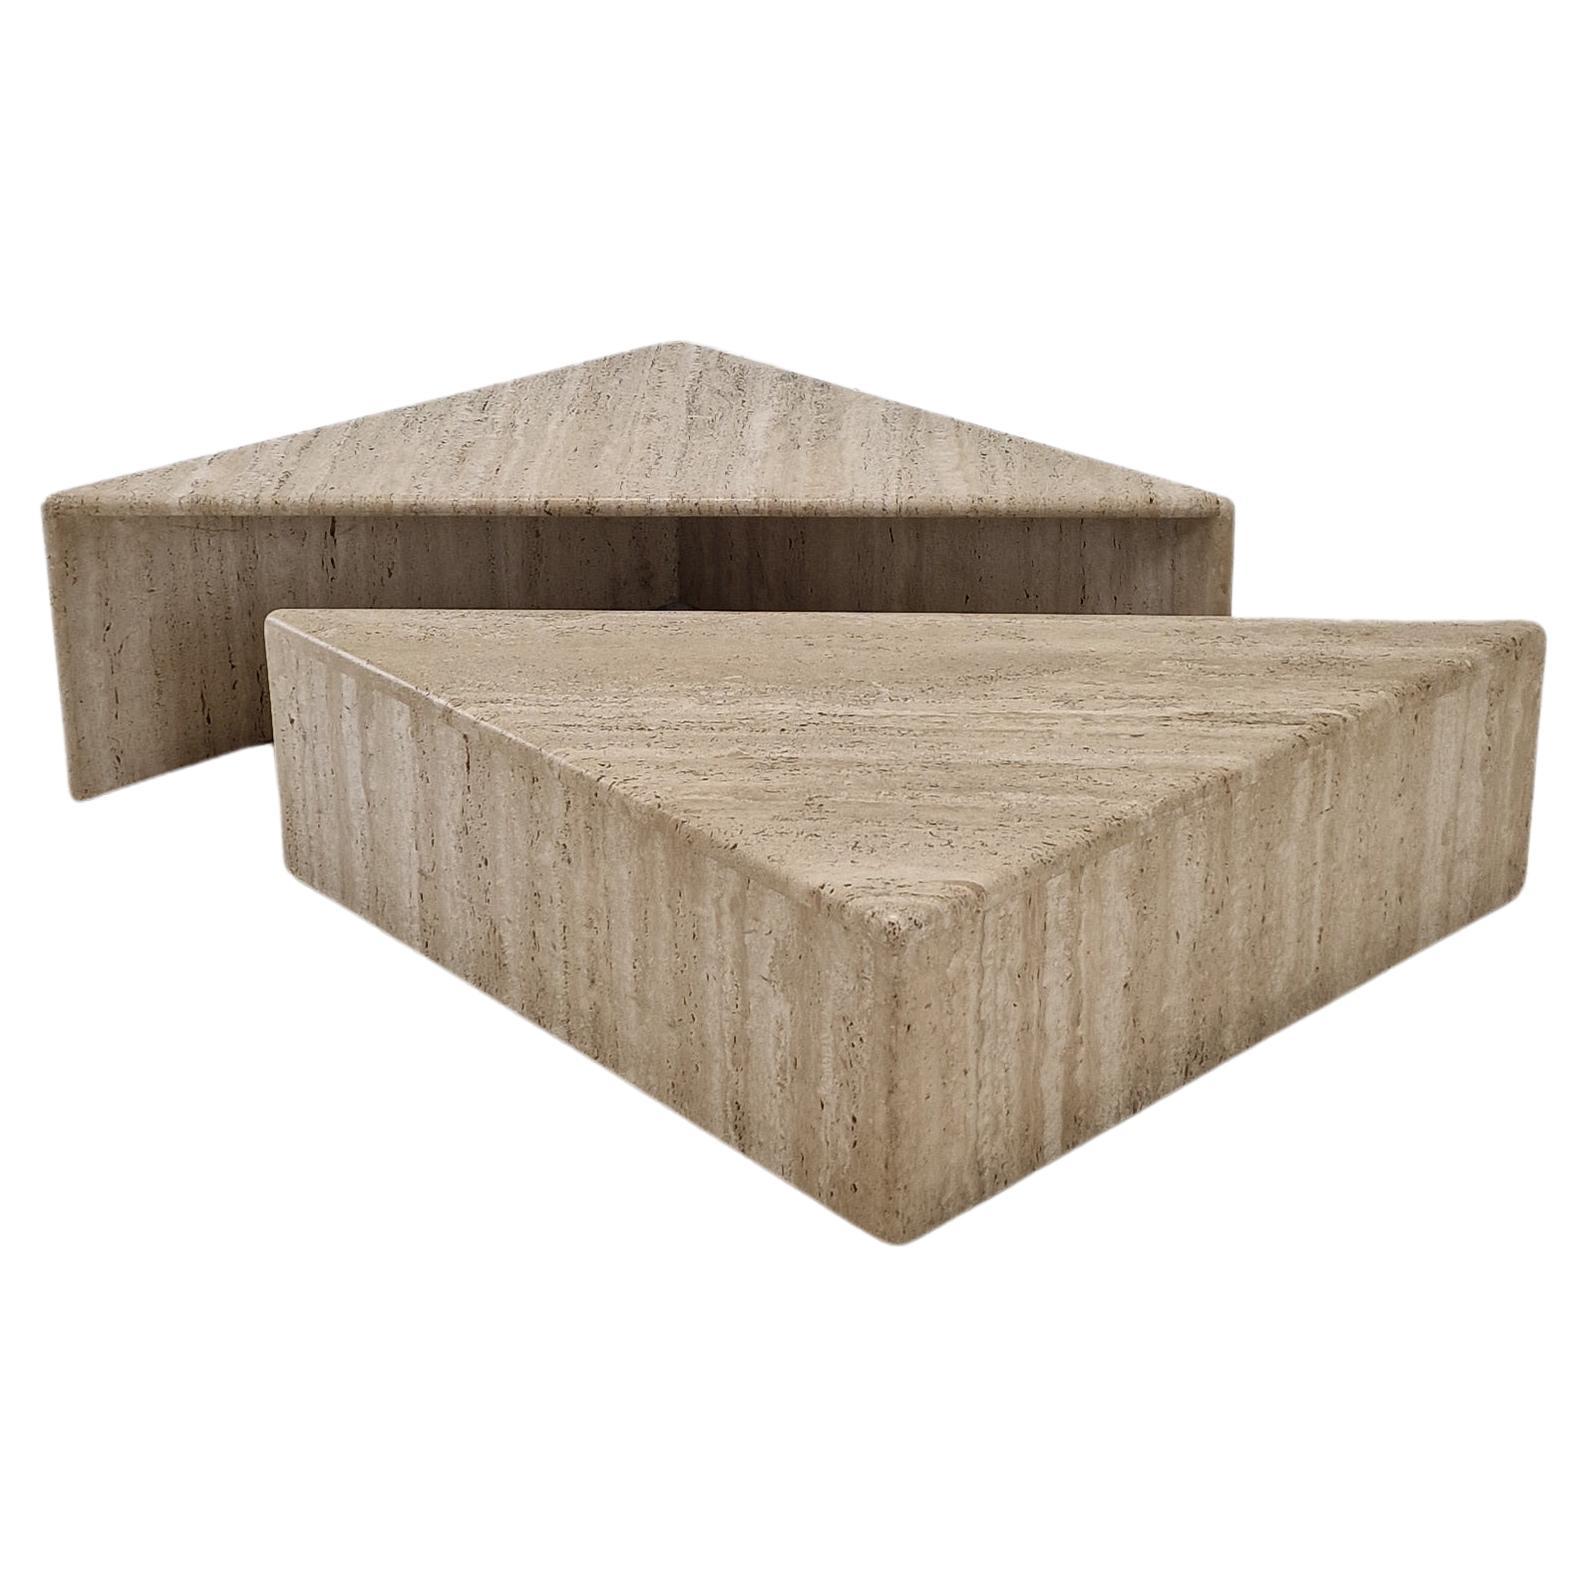 Set of Two Triangle Coffee Tables In Travertine By Up & Up, Italy 1980's For Sale